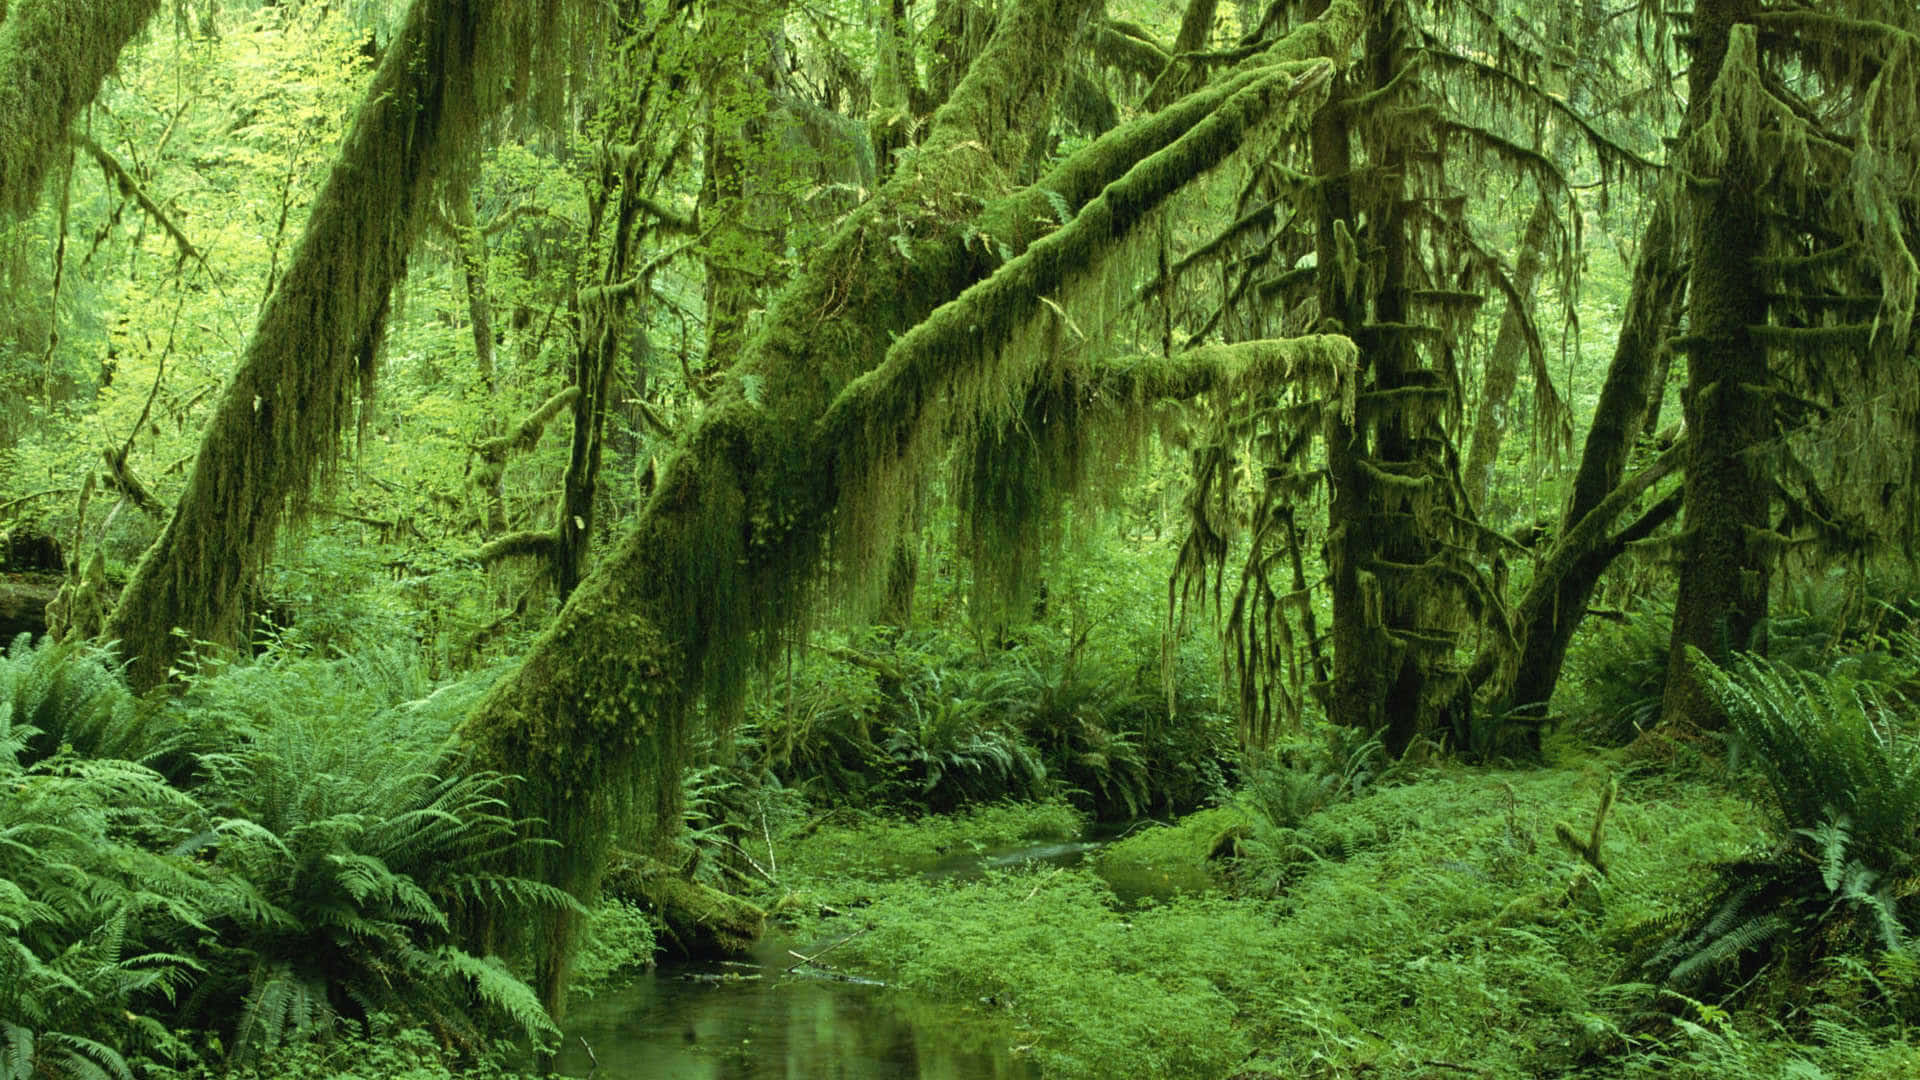 A mossy forest with ferns and a stream. - Jungle